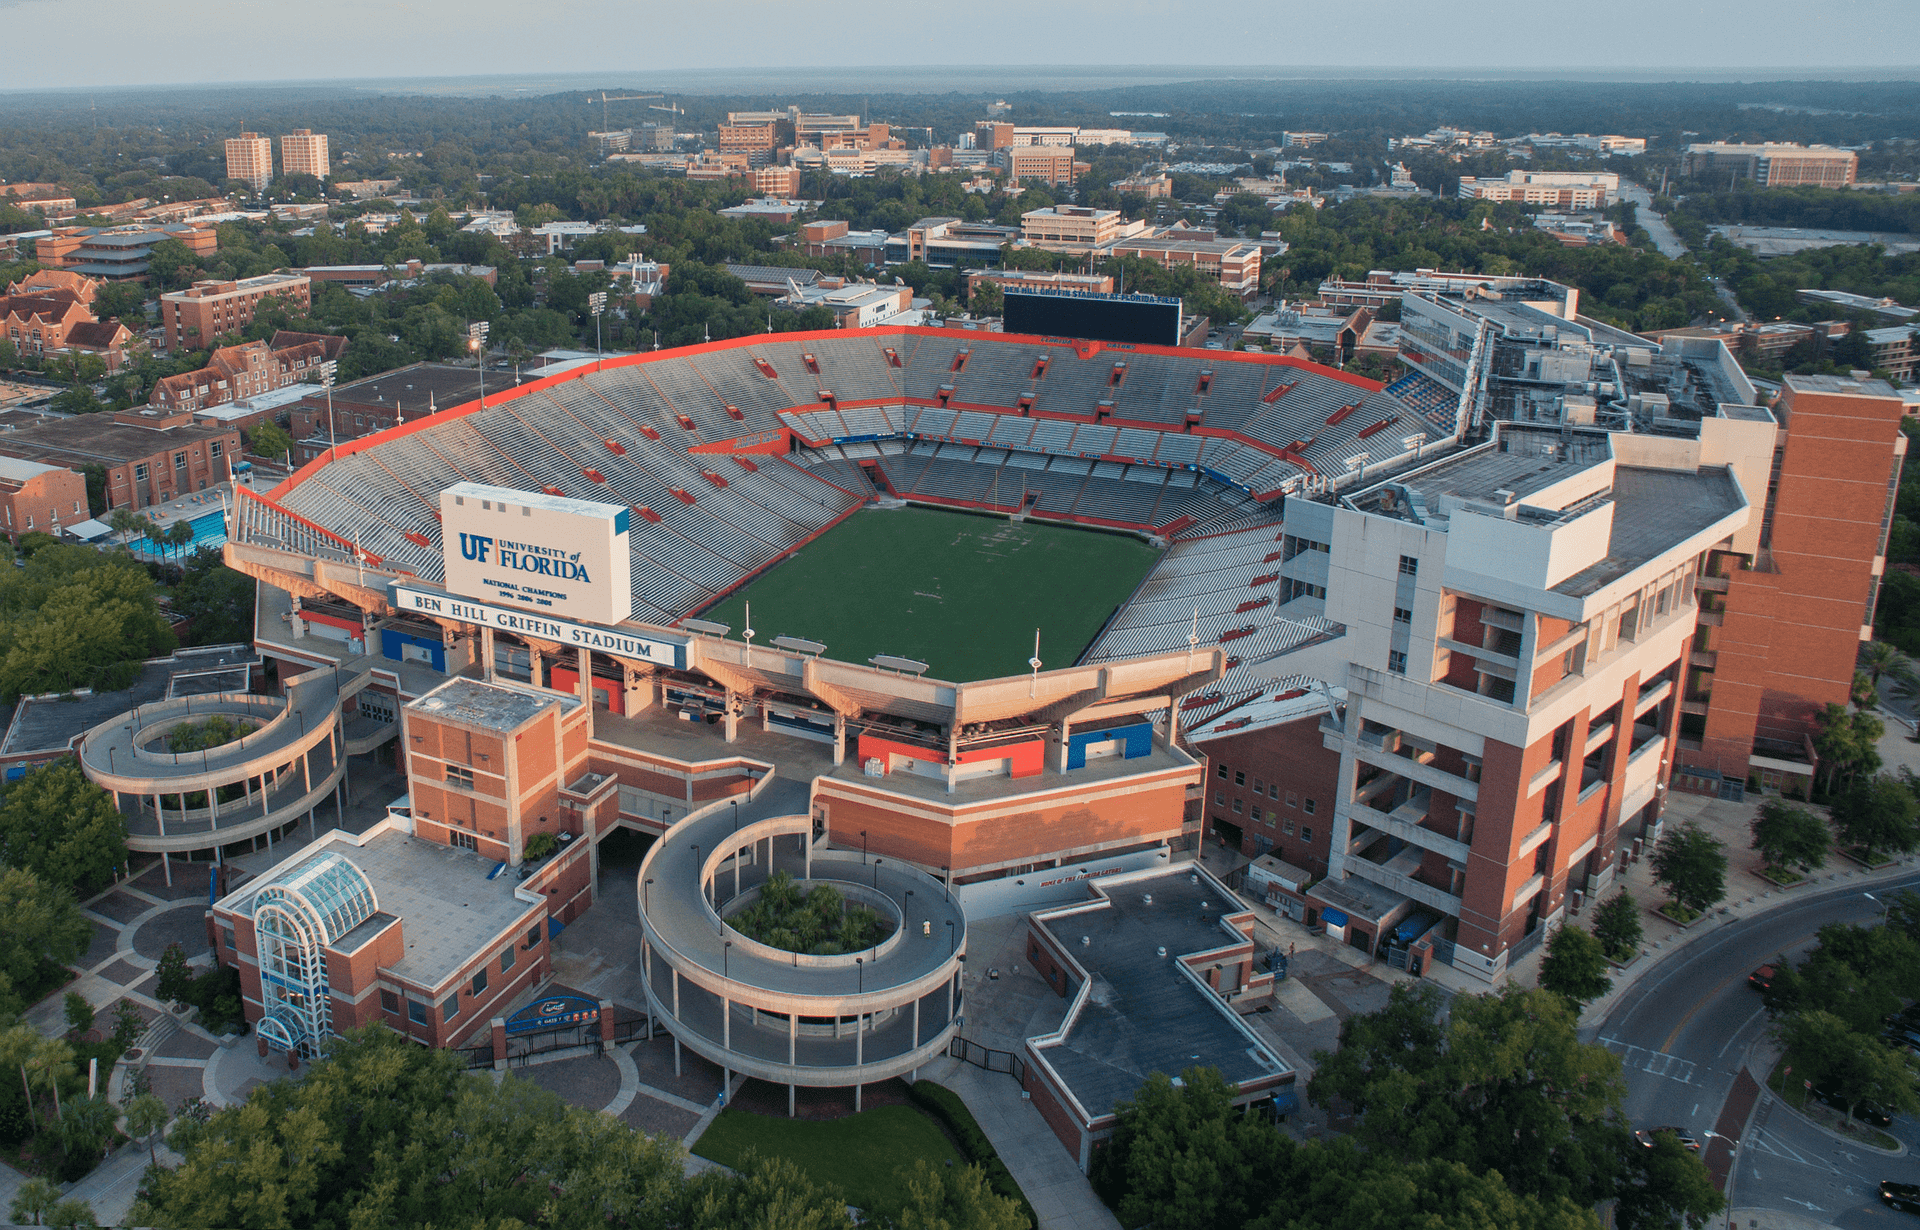 Best things to do in Gainesville Florida - Paulette Perhach - University of Florida Gators football stadium by jcalderaio from Pixabay